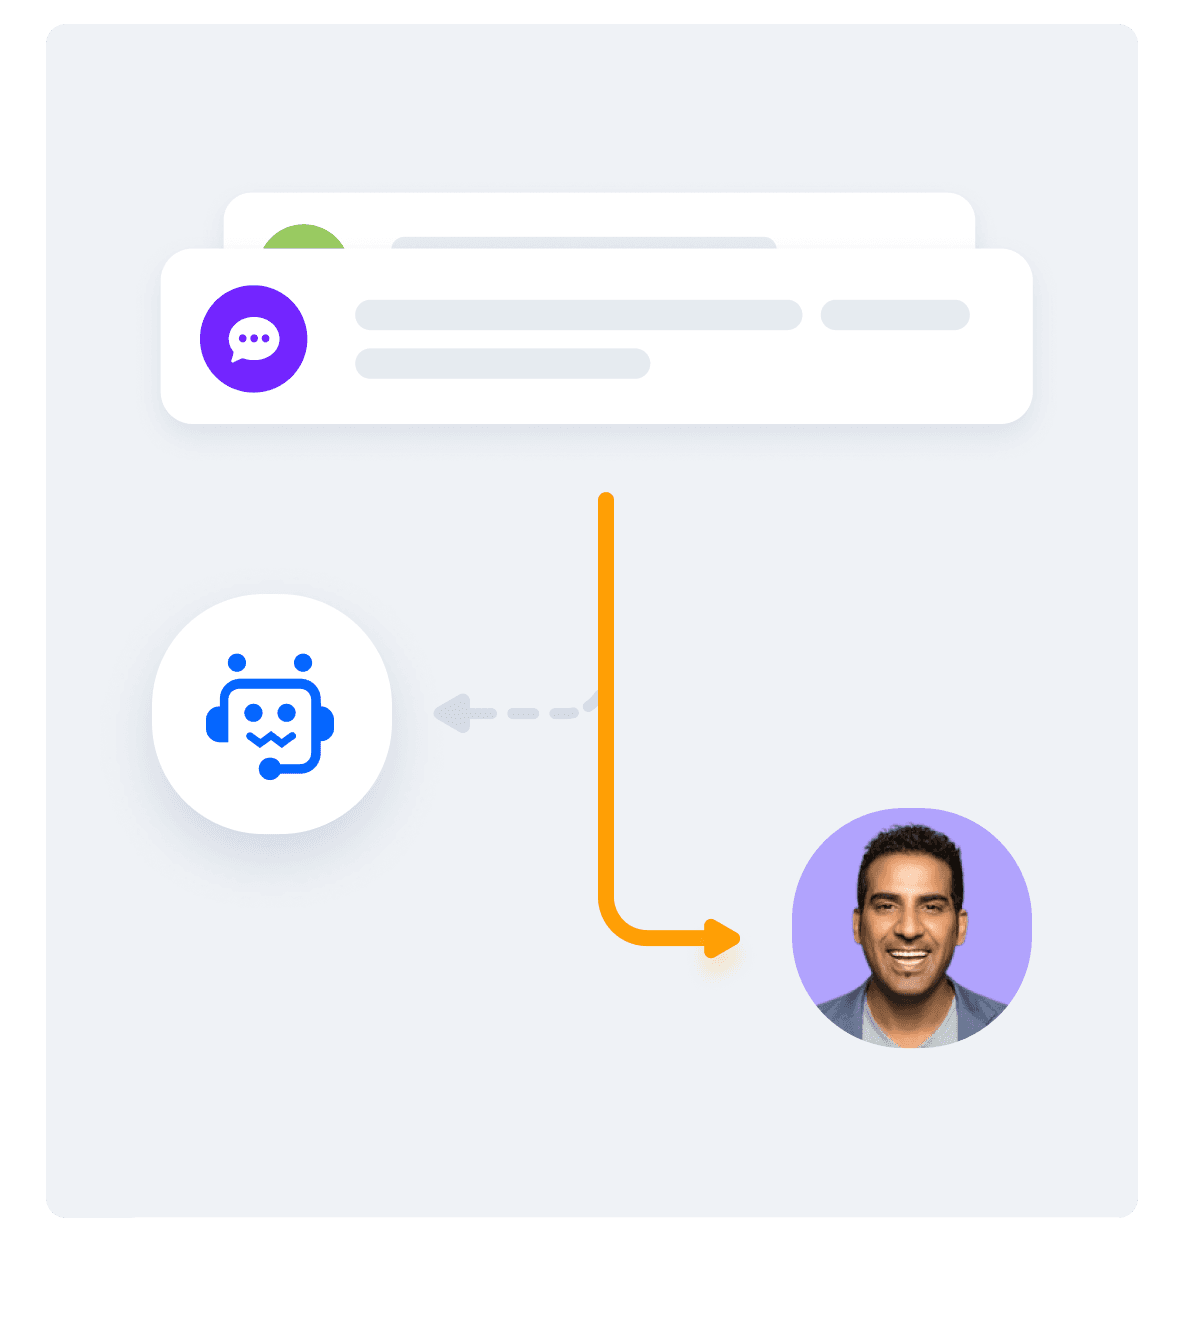 Self-service chatbots designed to save you time and effort